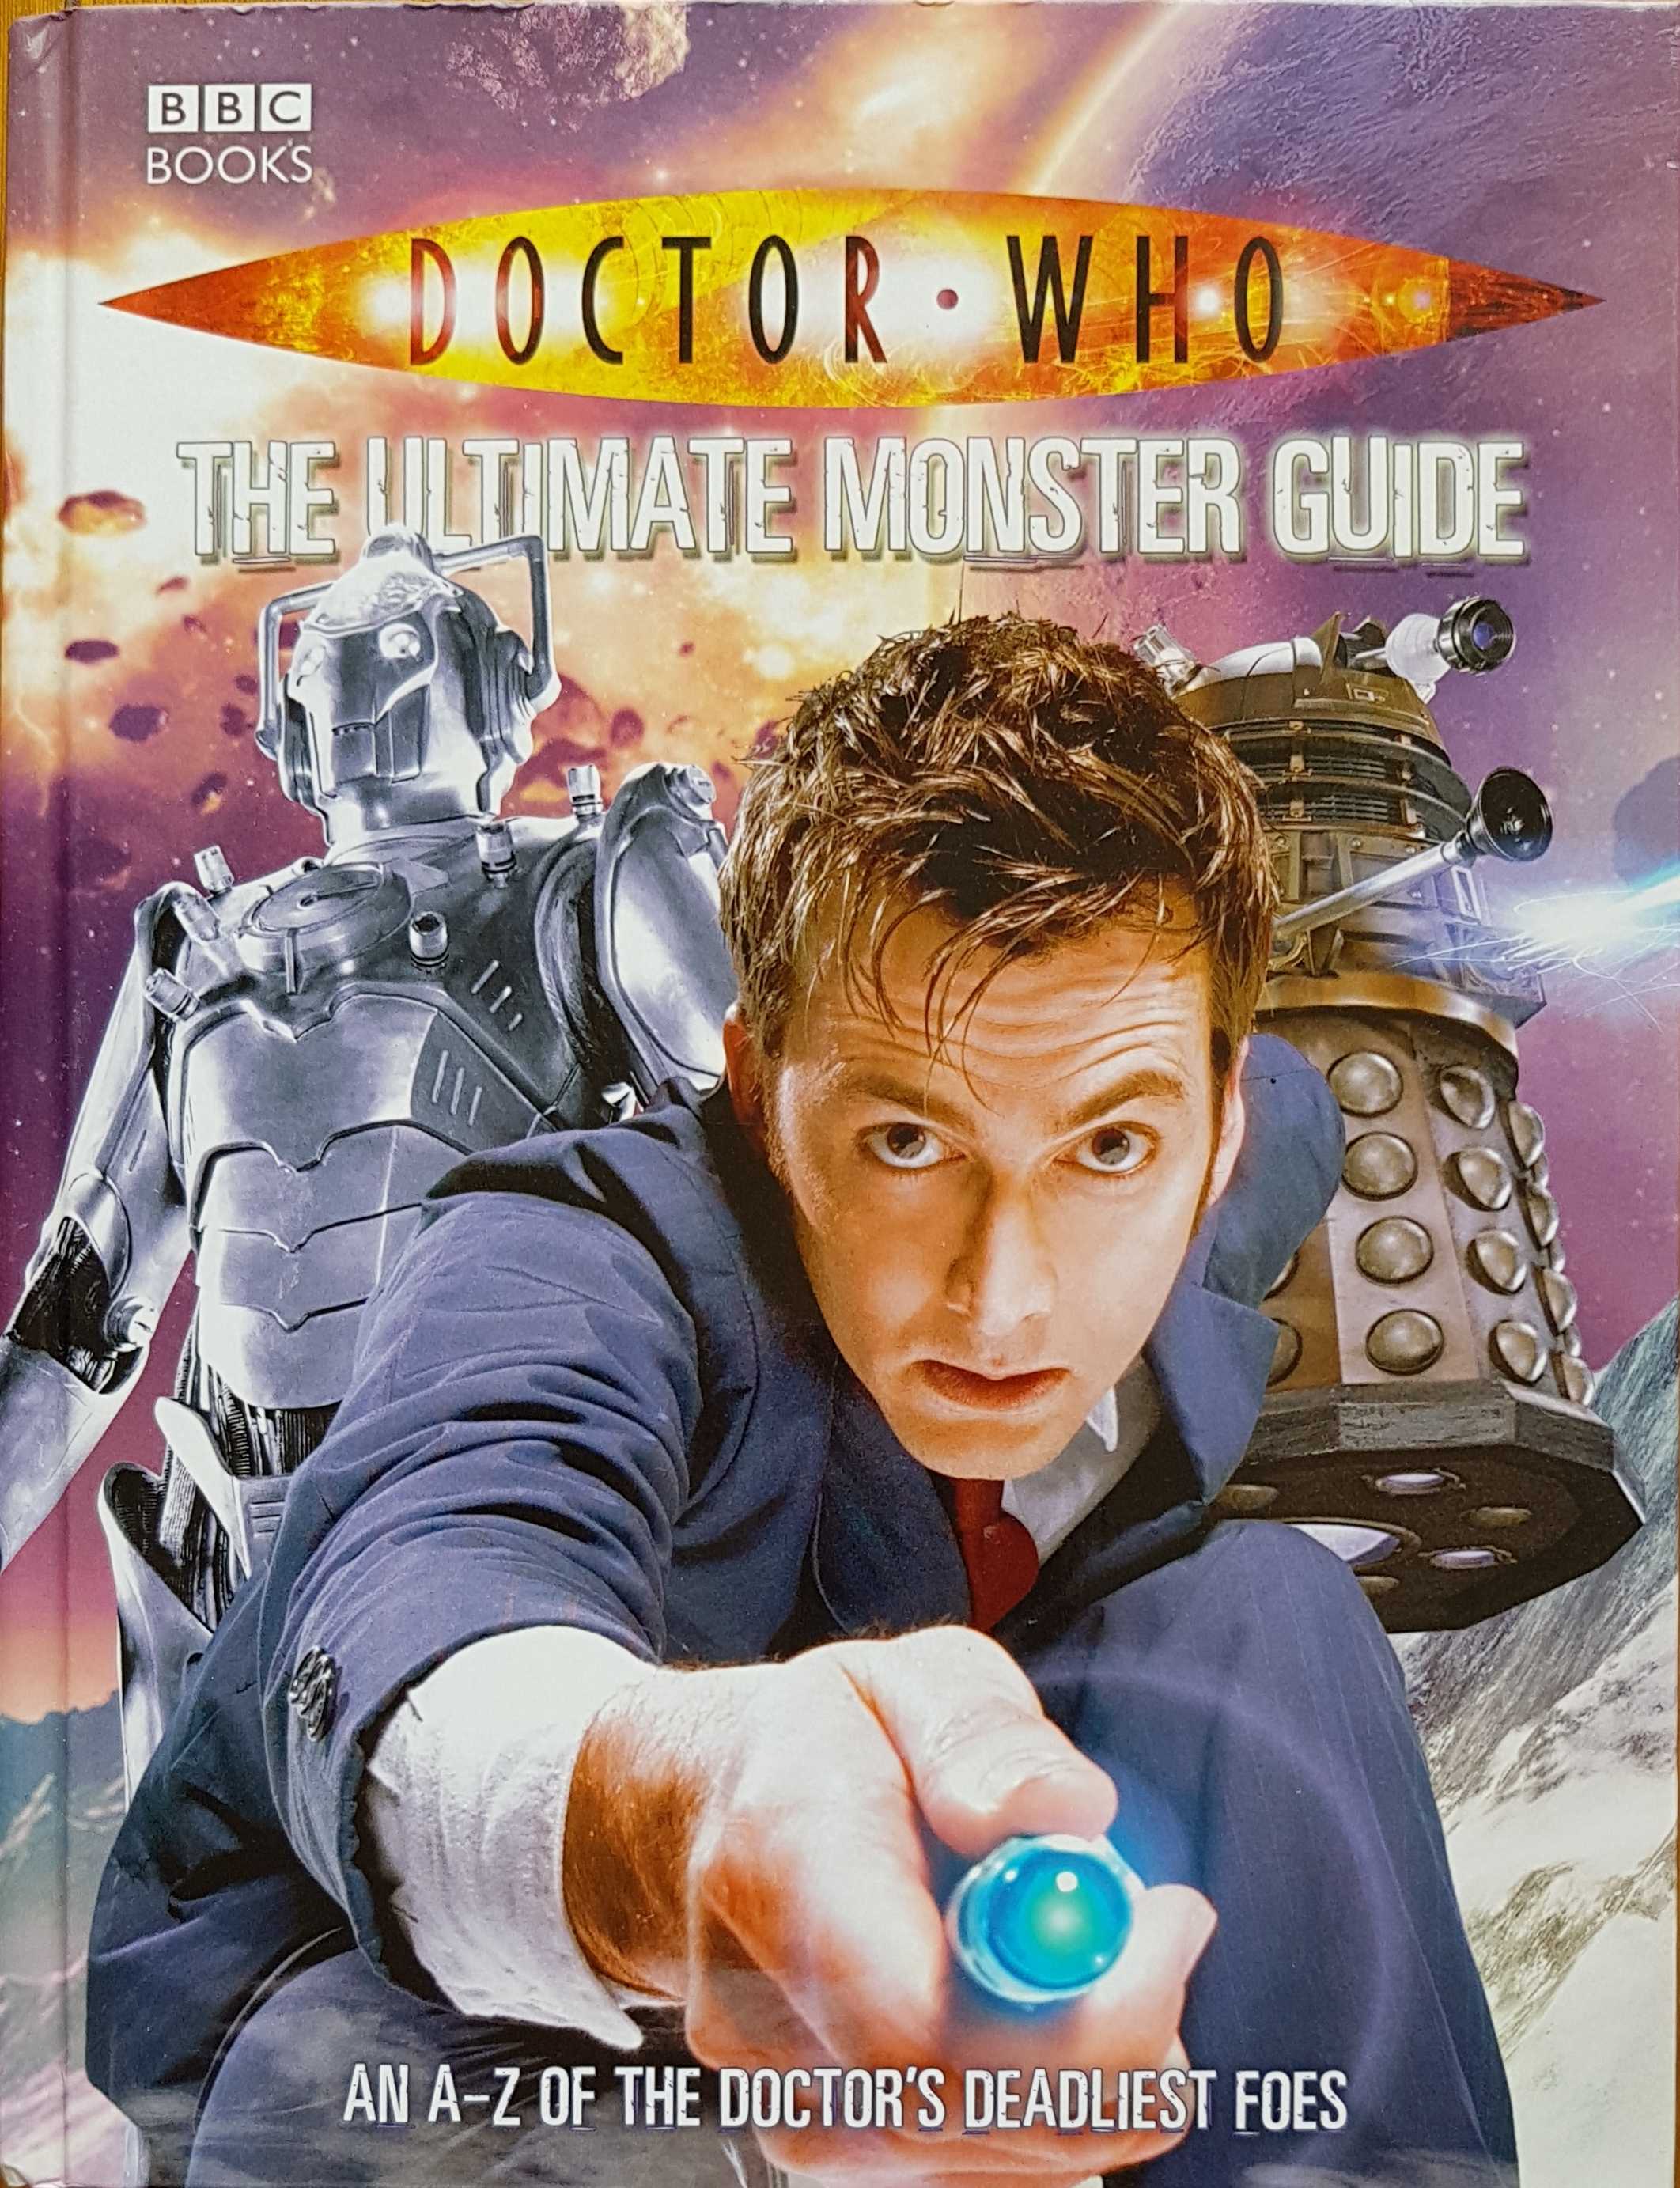 Picture of 978-1-846-07745-6 Doctor Who - The ultimate monsters guide by artist Justin Richards from the BBC records and Tapes library